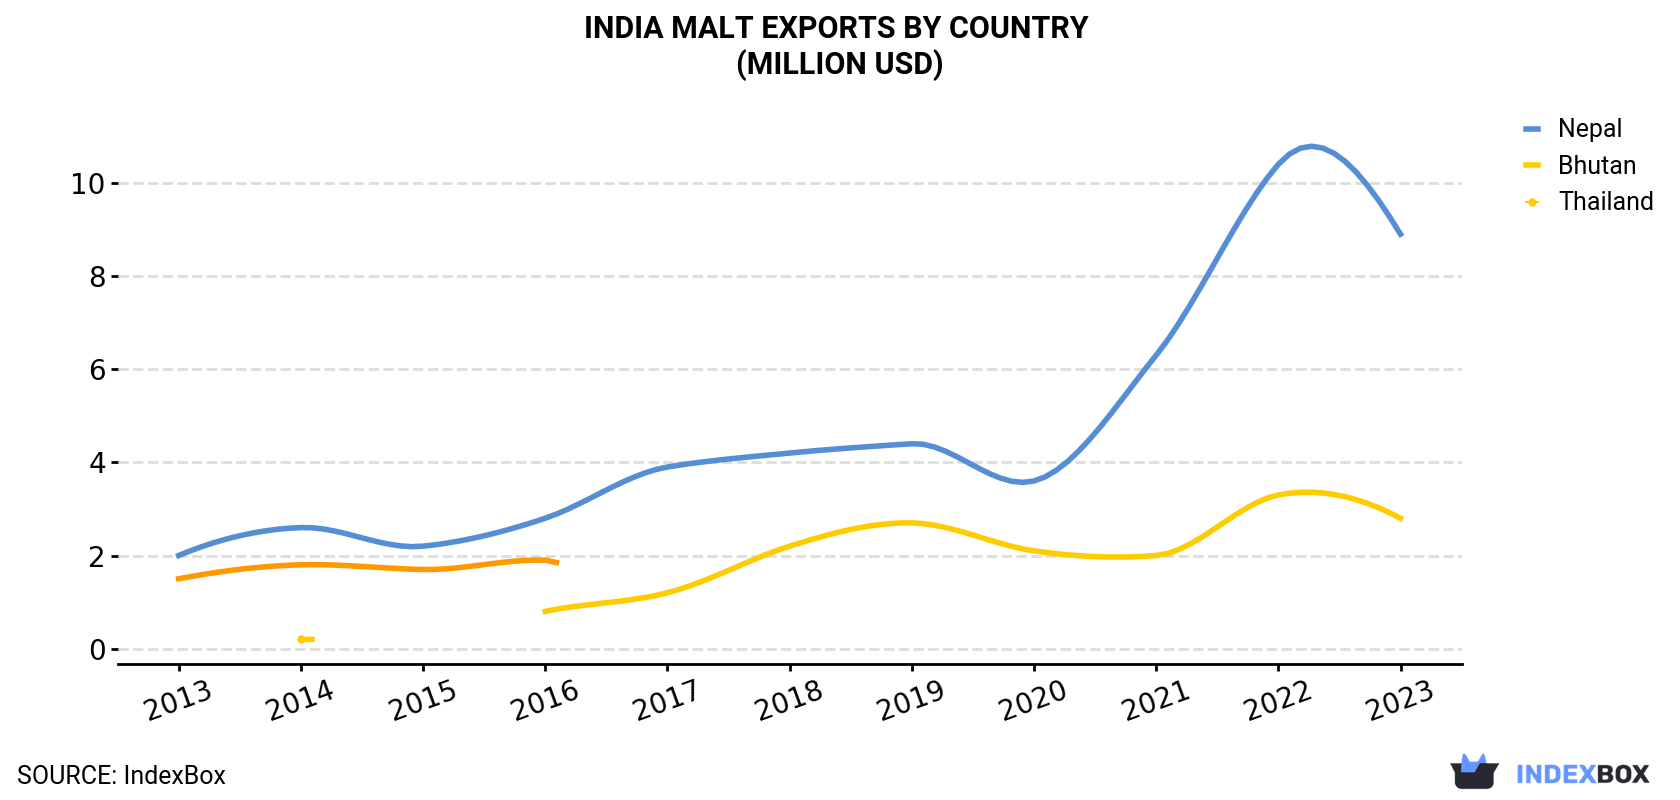 India Malt Exports By Country (Million USD)